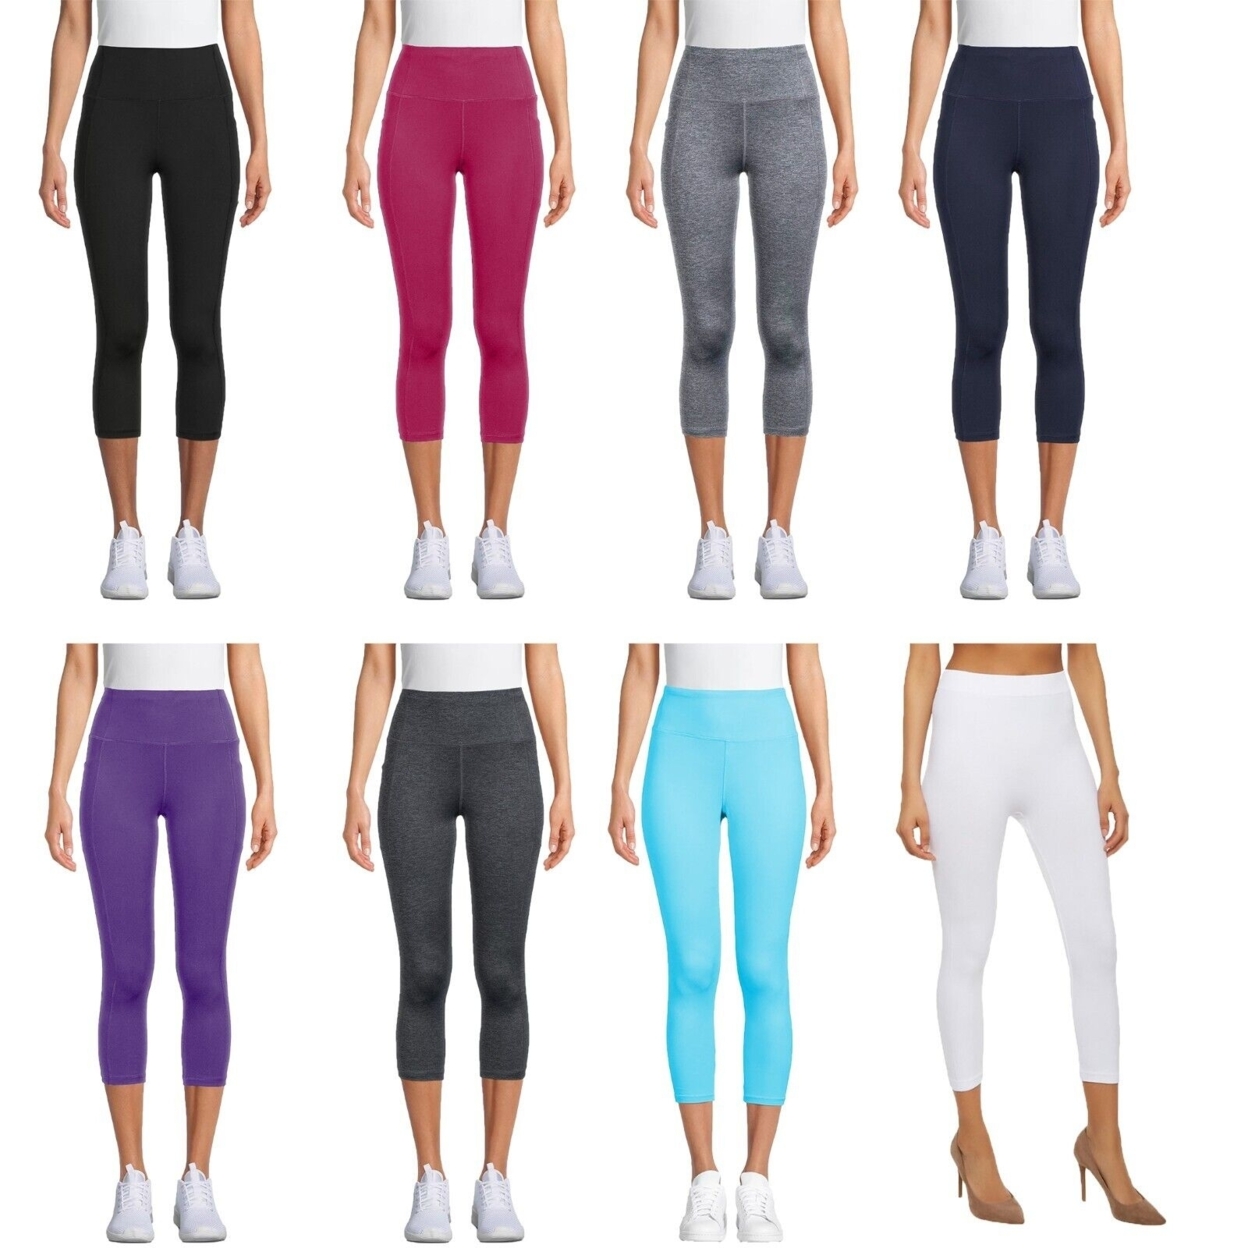 6-Pk Women's High Waisted Capri Leggings Basic Soft Stretchy Active And Casual Wear Tummy Control Solid Tights, Workout, Gym, Elastic Waist